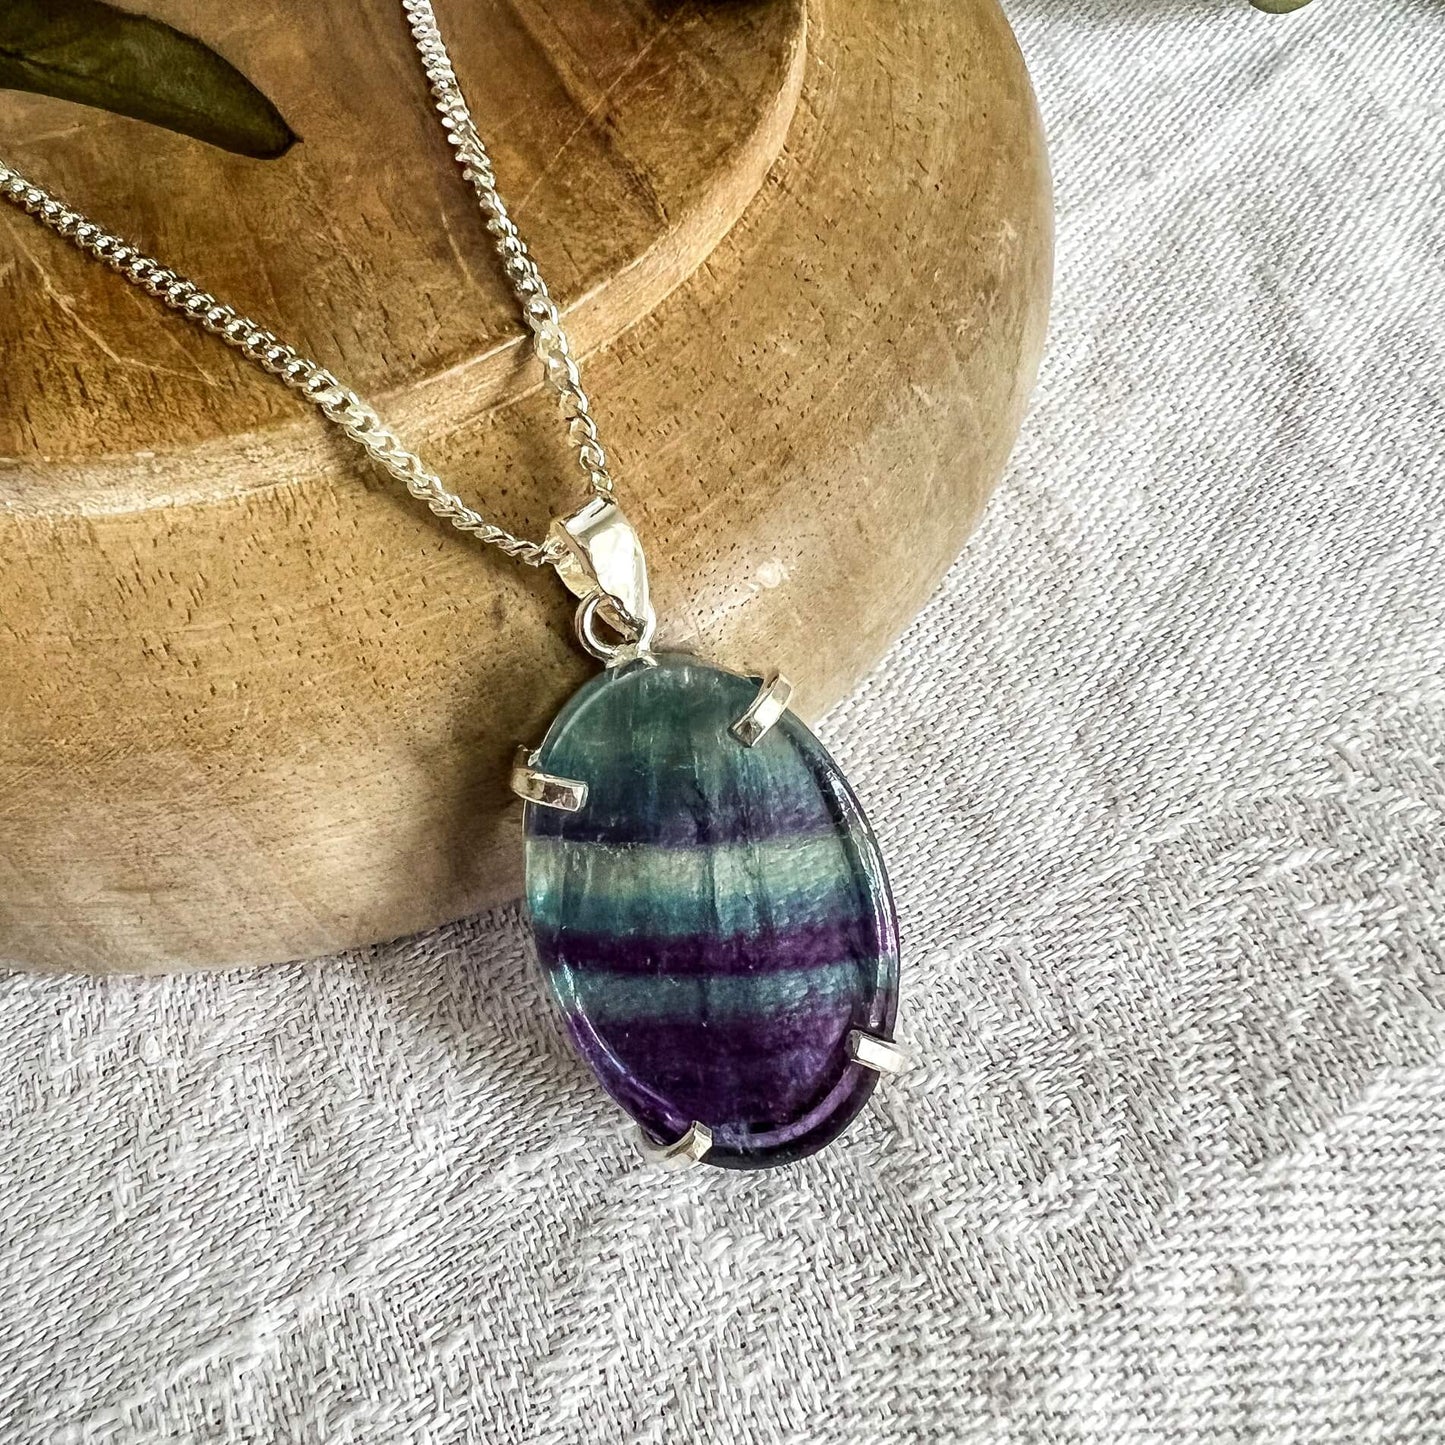 Pale aqua blue and purple striped fluorite crystal pendant on a silver chain close up